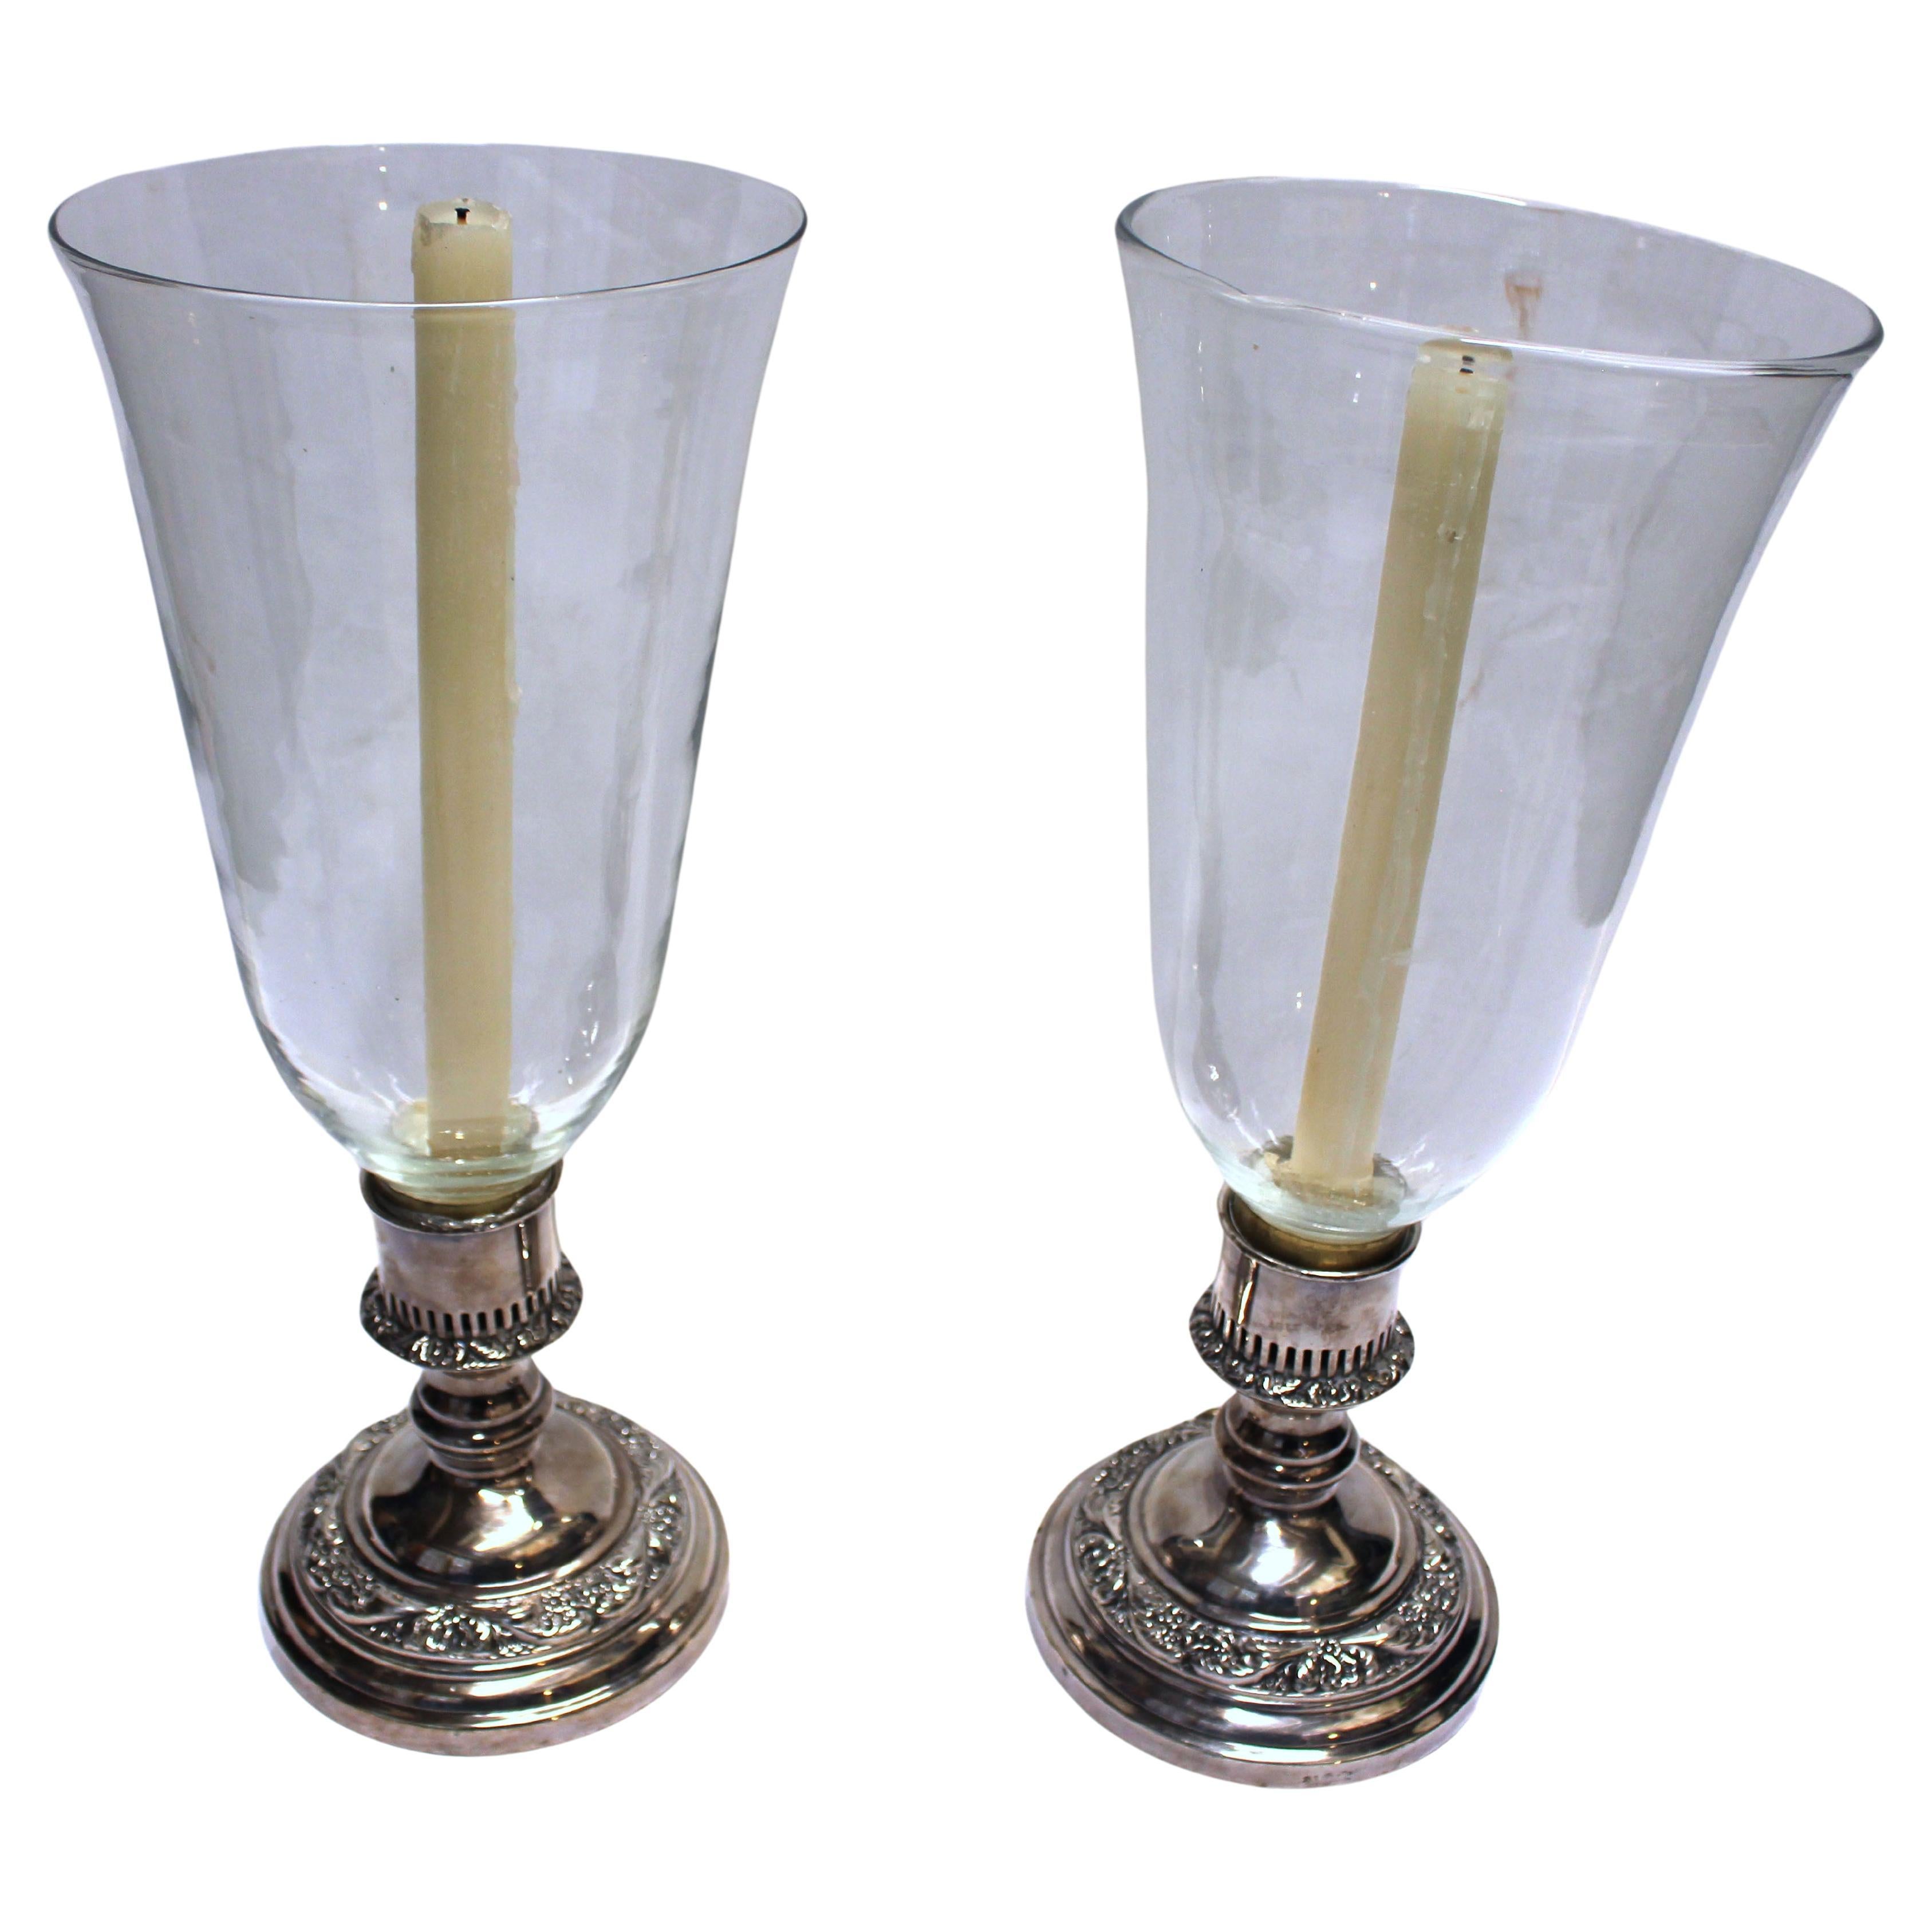 Circa 1930s Pair of Hurricane Silver Plated Candle Holders, England For Sale